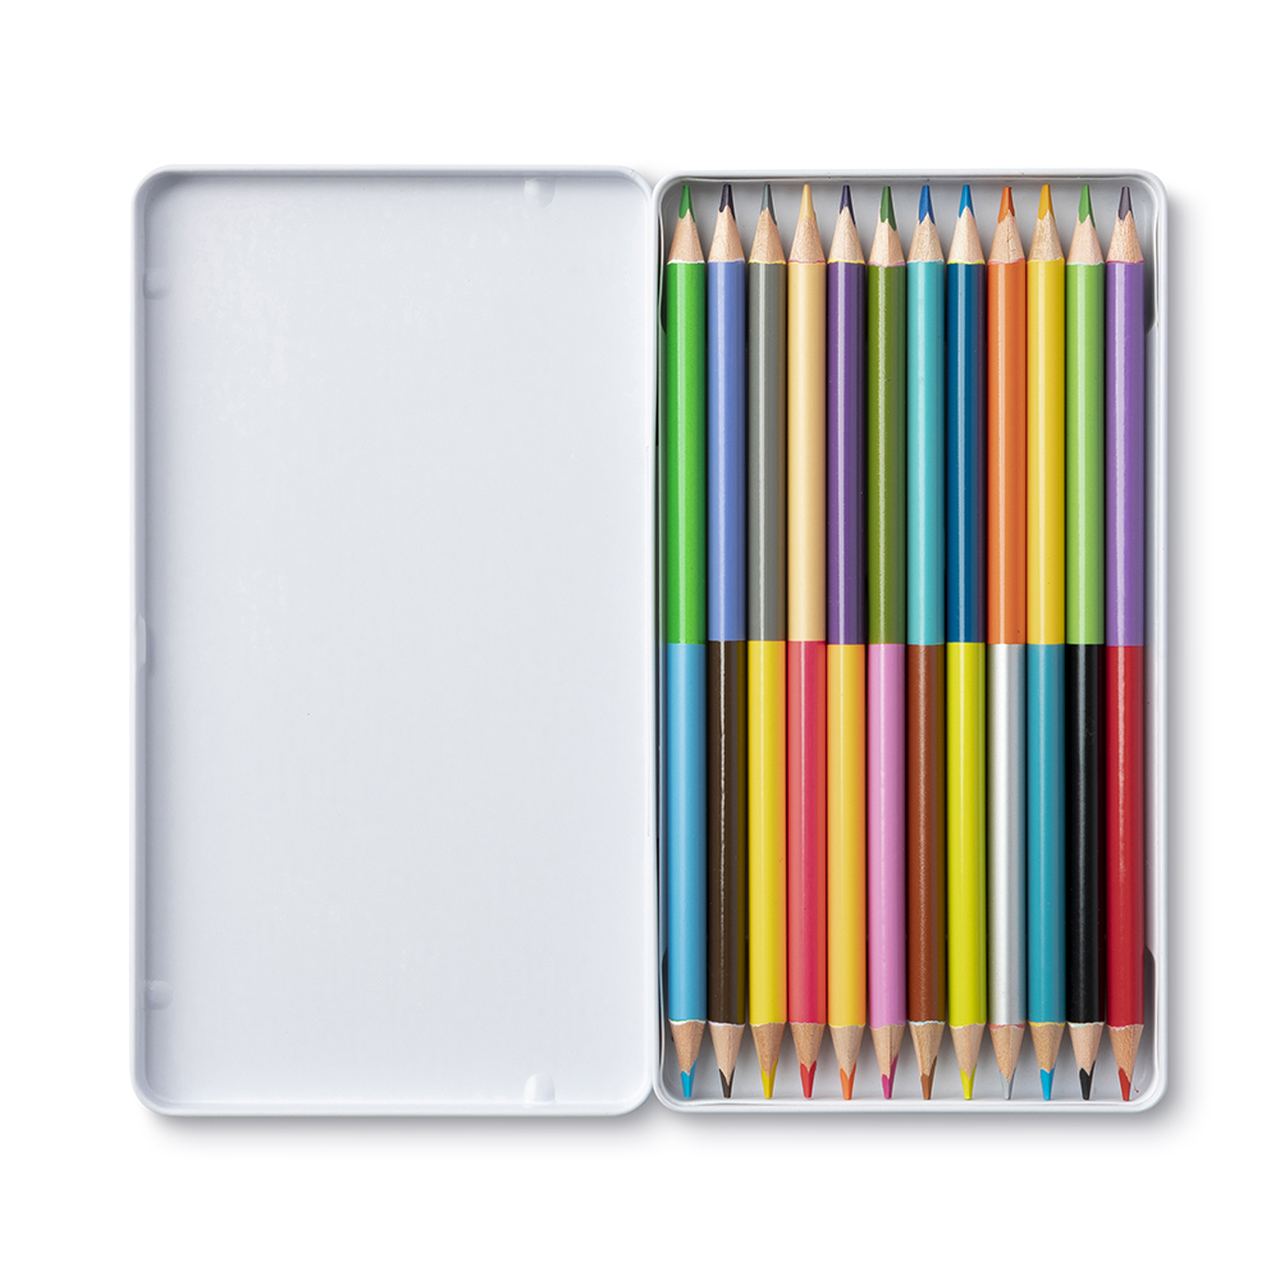 Colored Pencil Set - What Do We Have Here